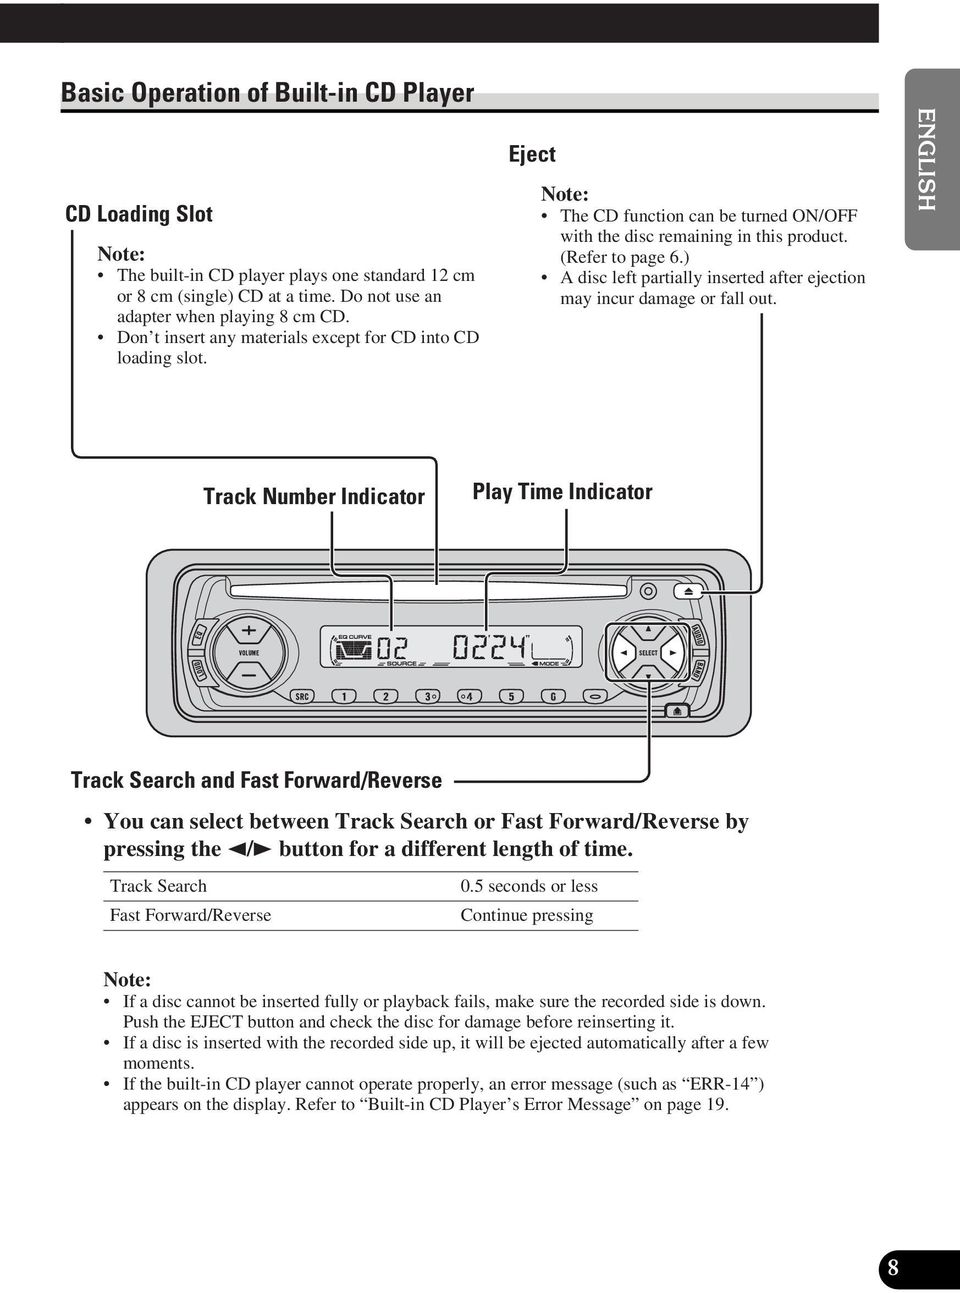 Track Number Indicator Track Search and Fast Forward/Reverse Eject Note: The CD function can be turned ON/OFF with the disc remaining in this product. (Refer to page 6.